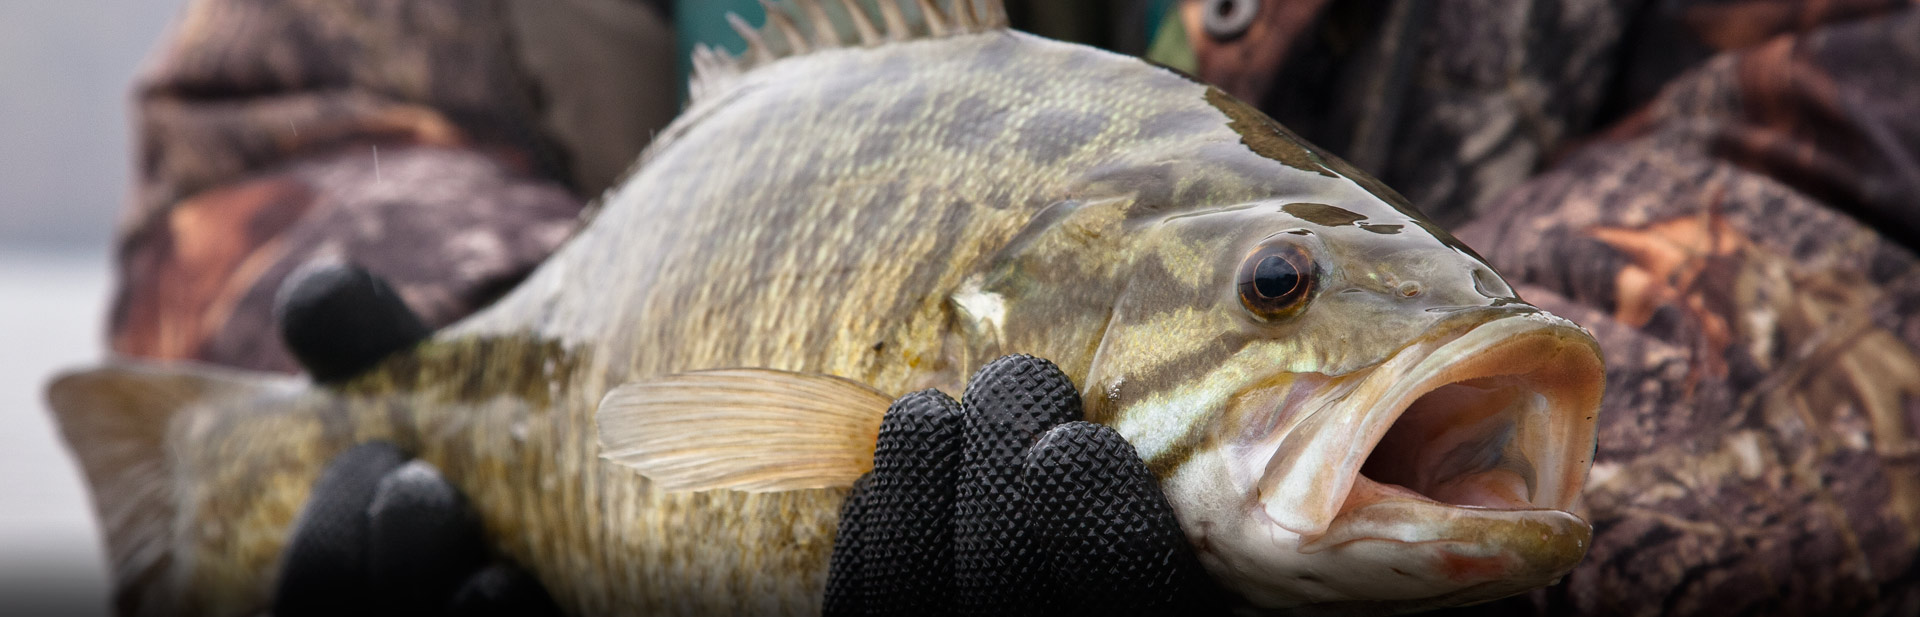 Smallmouth being handled